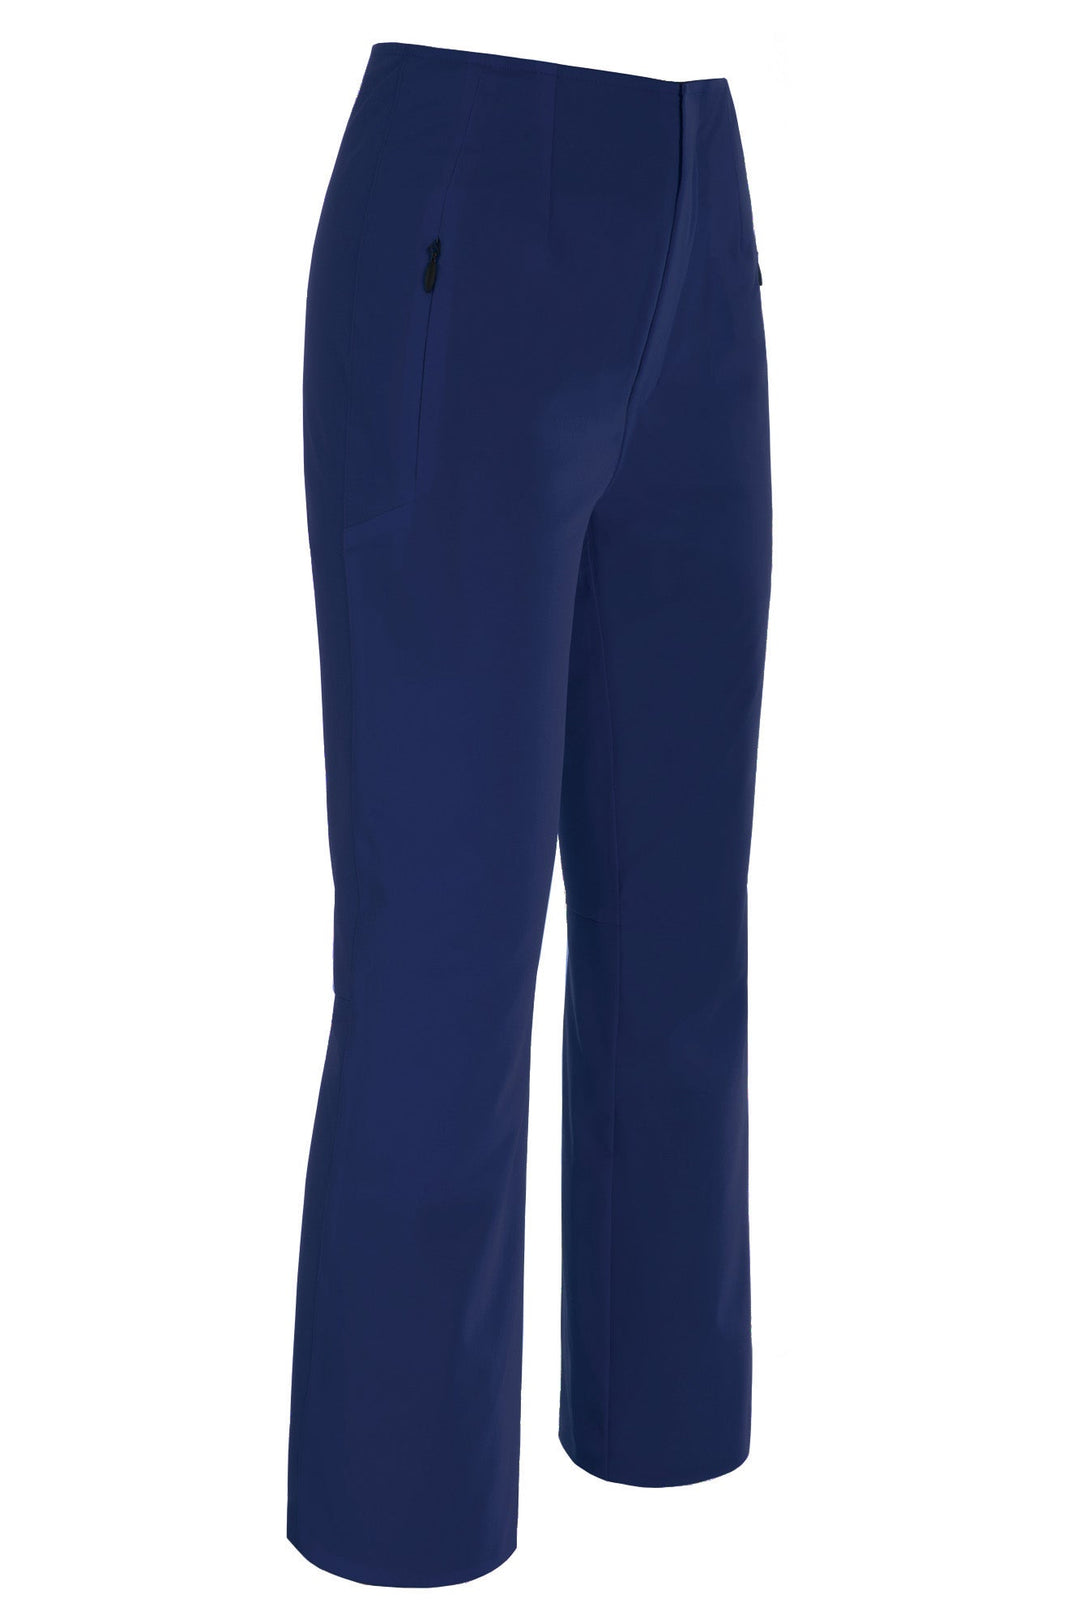 High Heaven Stretch Insulated Pant